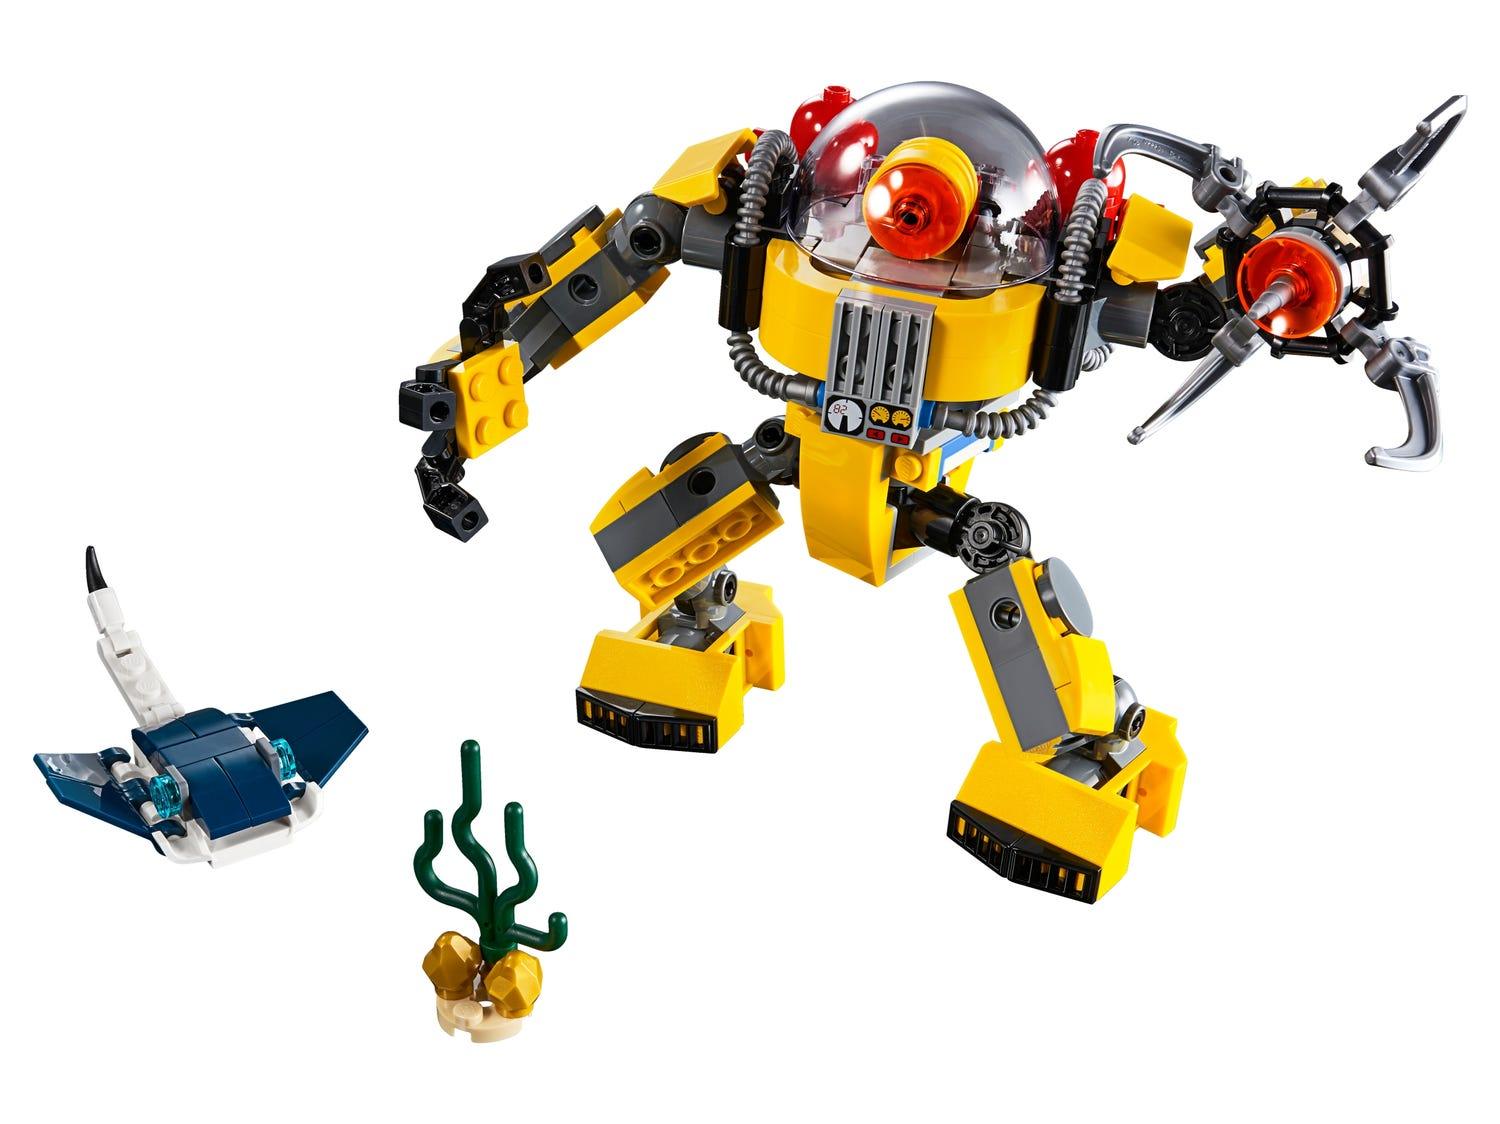 LEGO Onderwater robot 31090 Creator 3-in-1 | 2TTOYS ✓ Official shop<br>